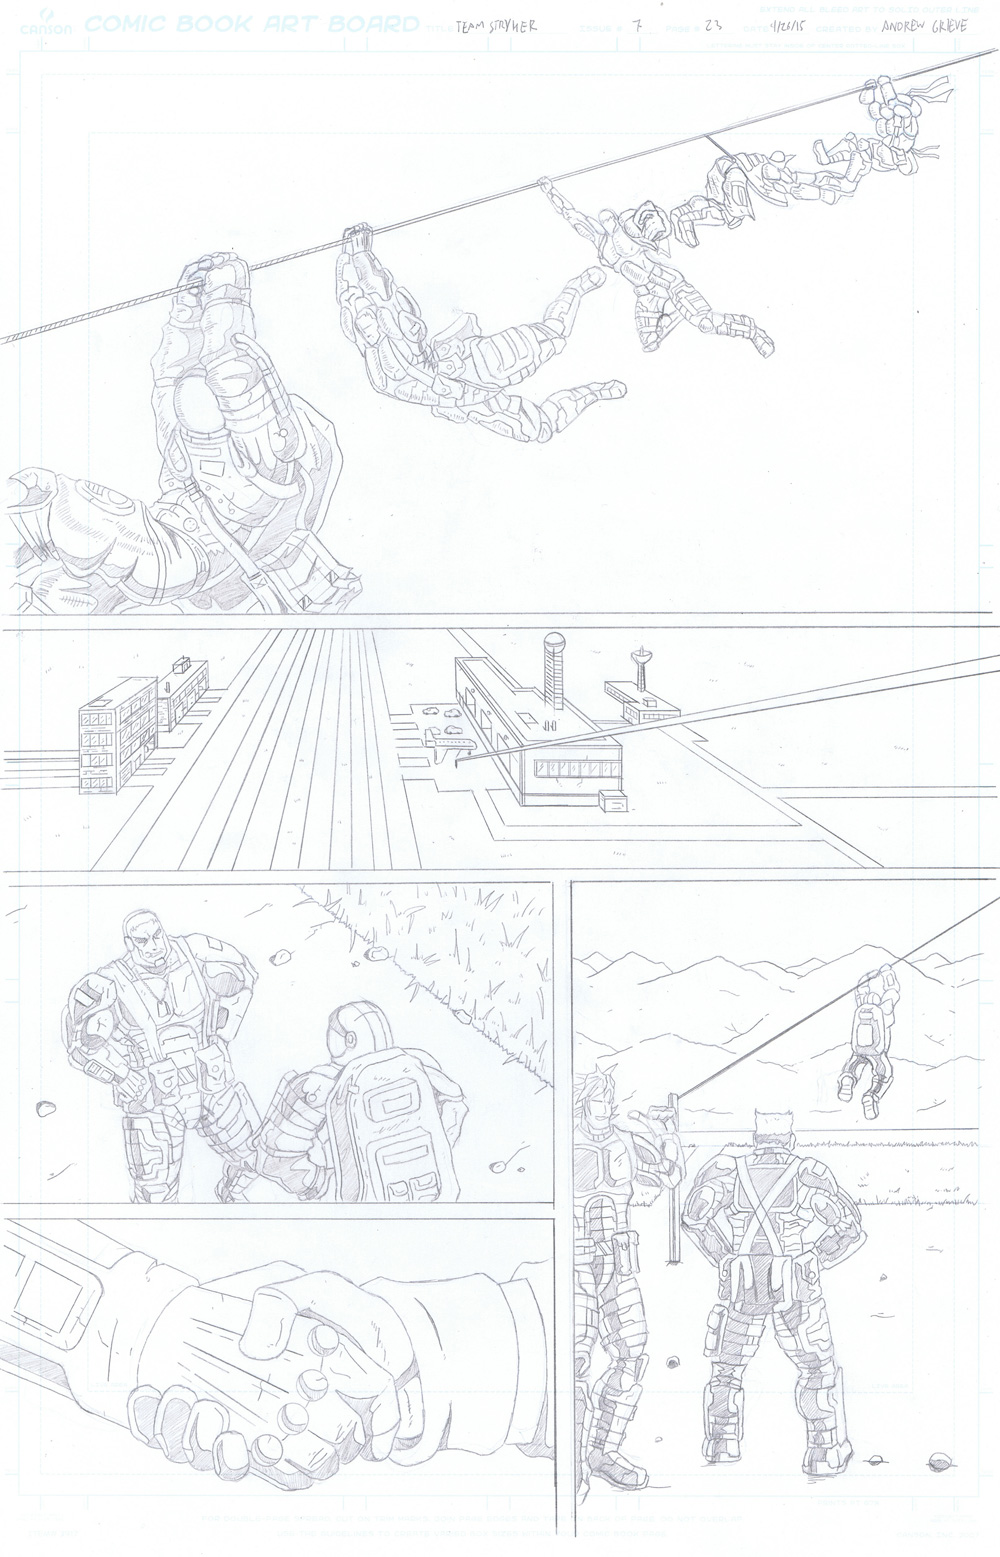 MISSION 007: PAGE 23 PENCIL